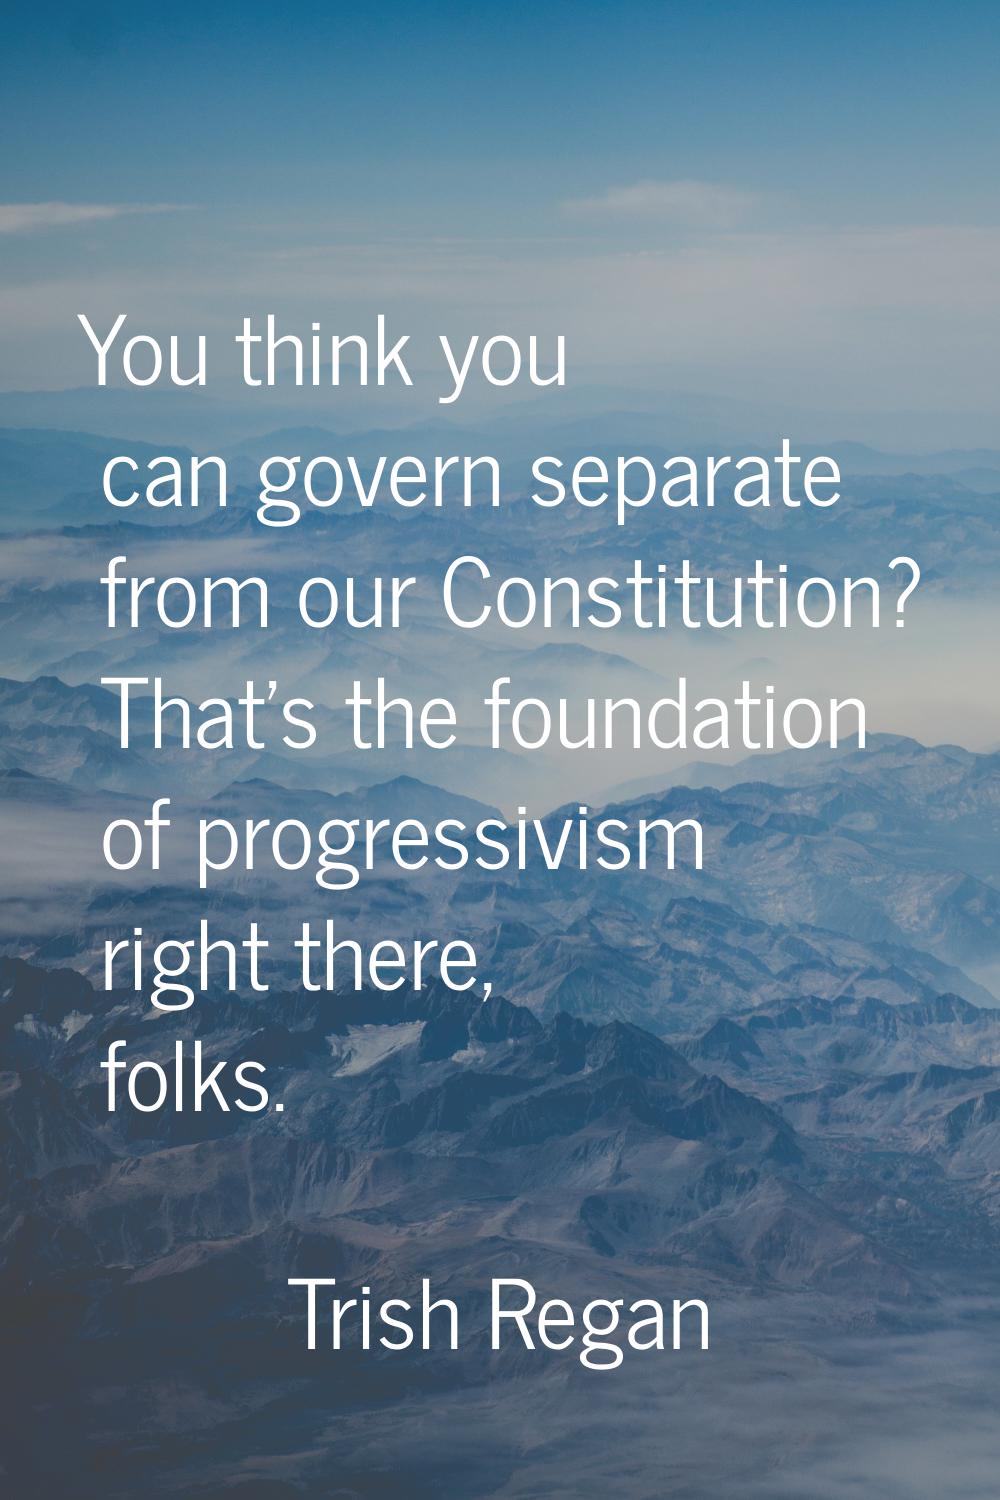 You think you can govern separate from our Constitution? That's the foundation of progressivism rig